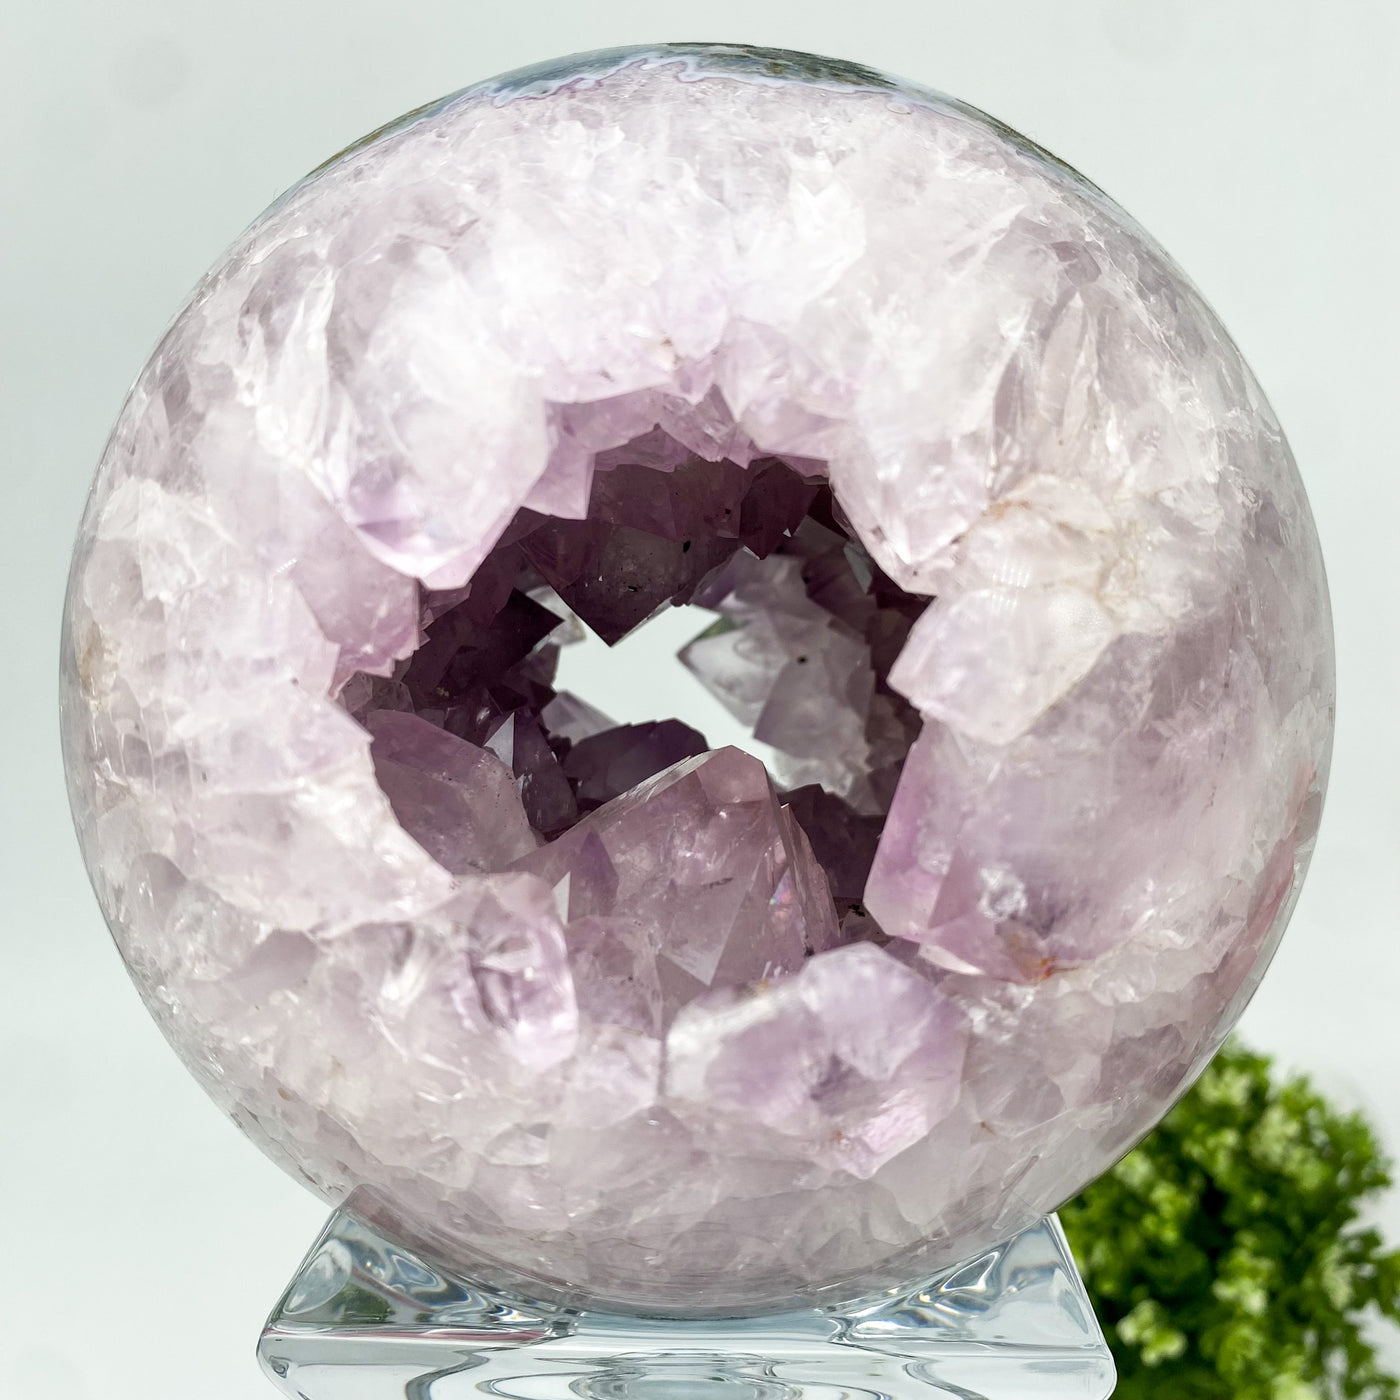 Amethyst sphere with Agate inclusions ✨